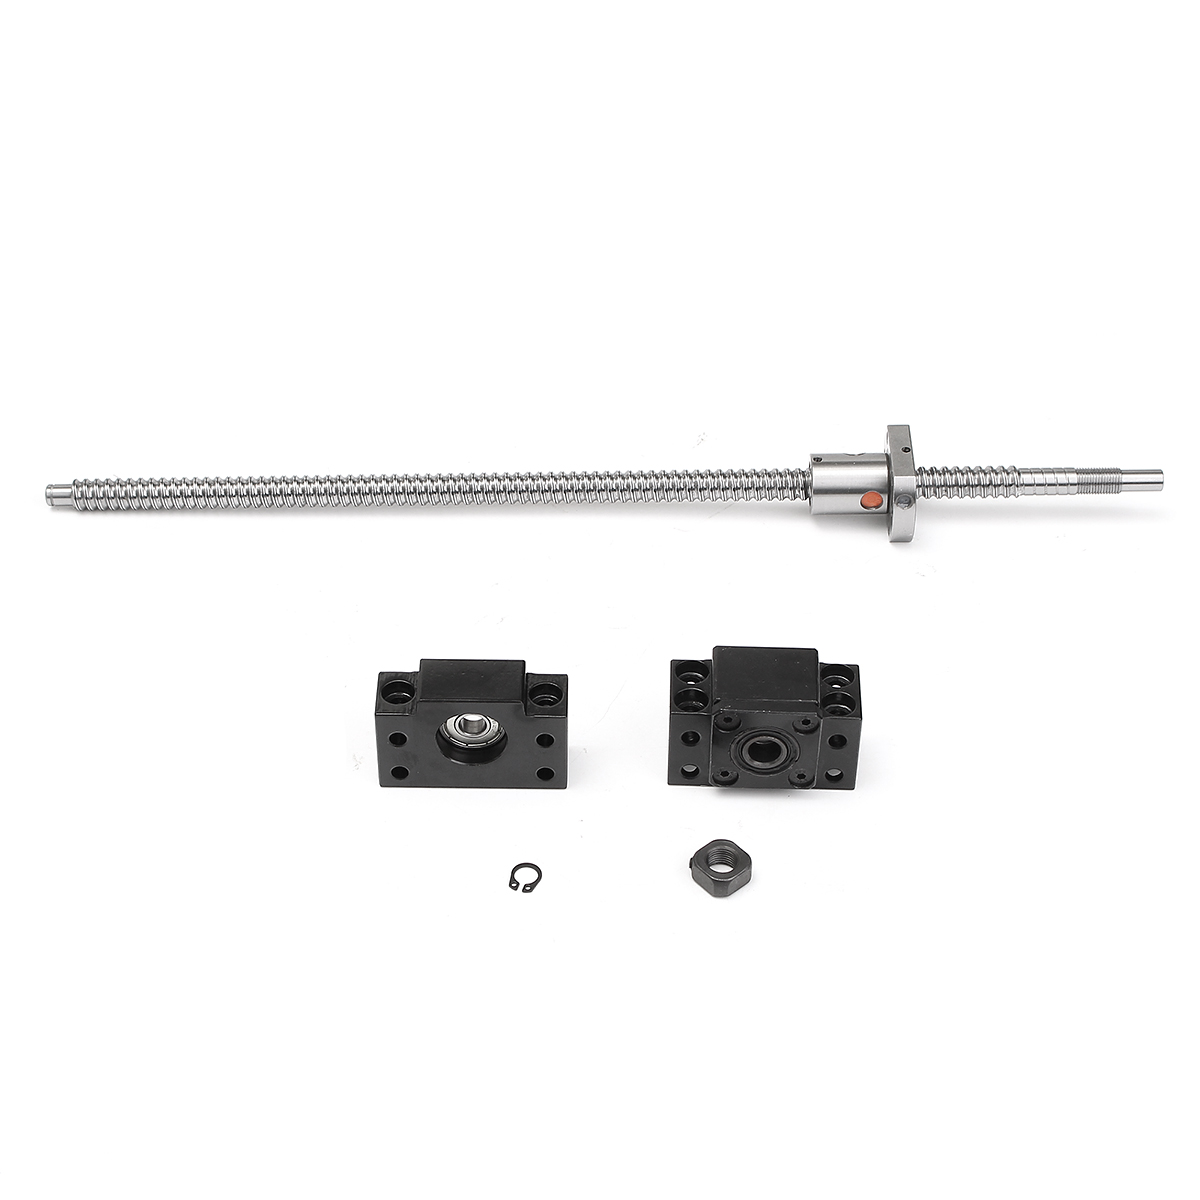 12mm-SFU1204-Ball-Screw-Length-400mm-With-Ball-Nut-And-BFBK10-End-Support-1092957